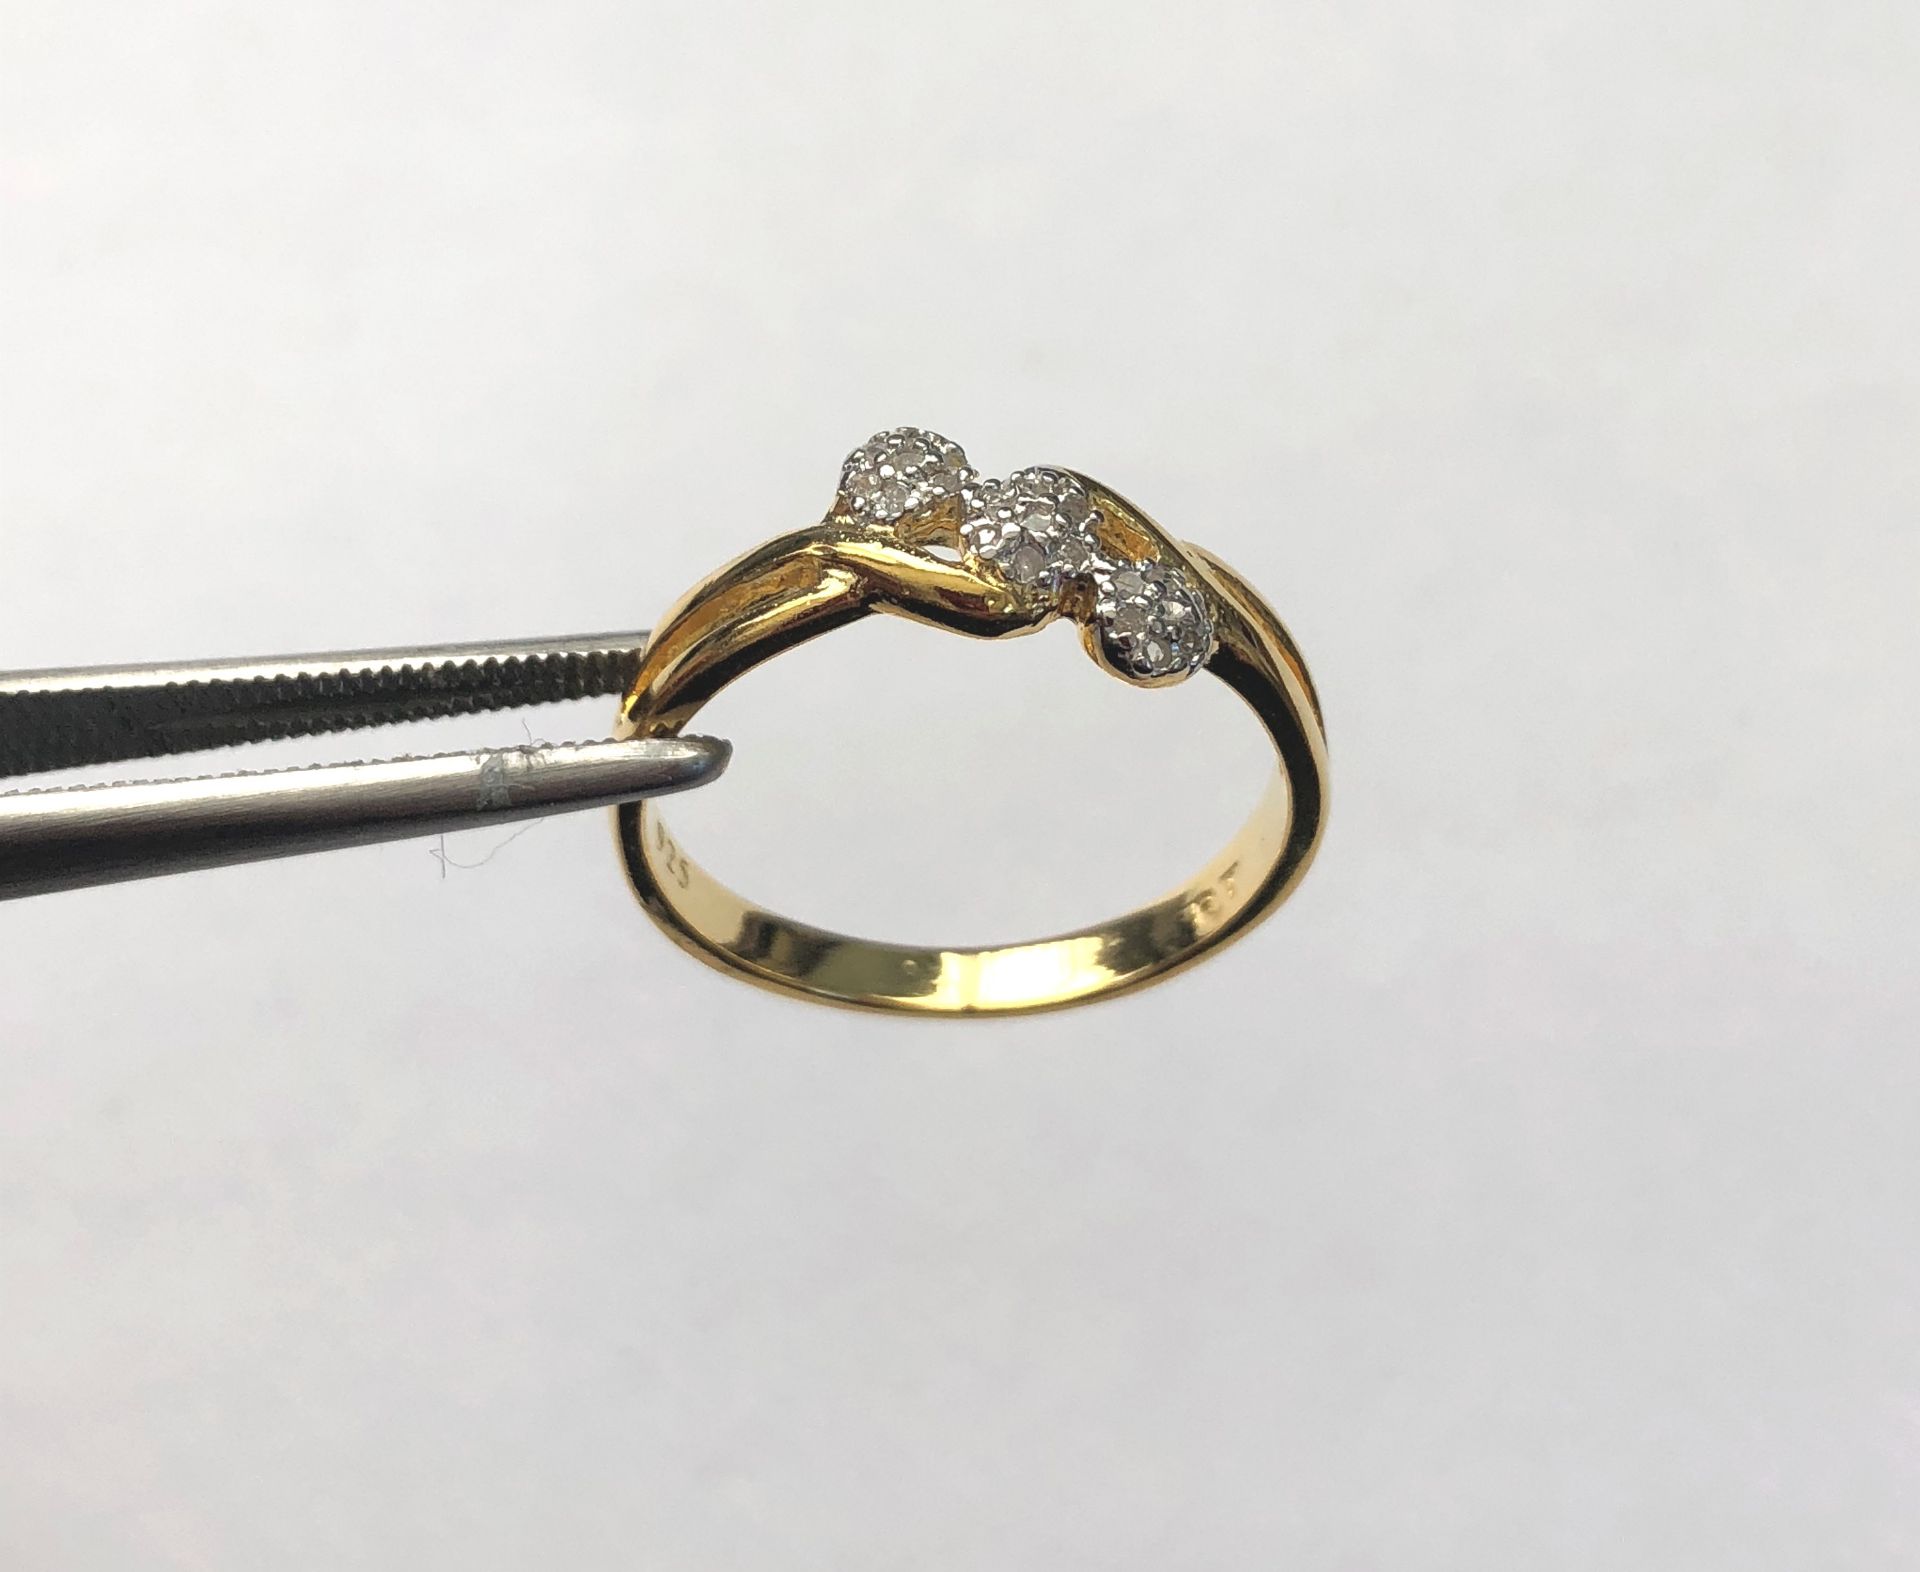 18k gold over sterling silver, diamond ring - Image 2 of 2